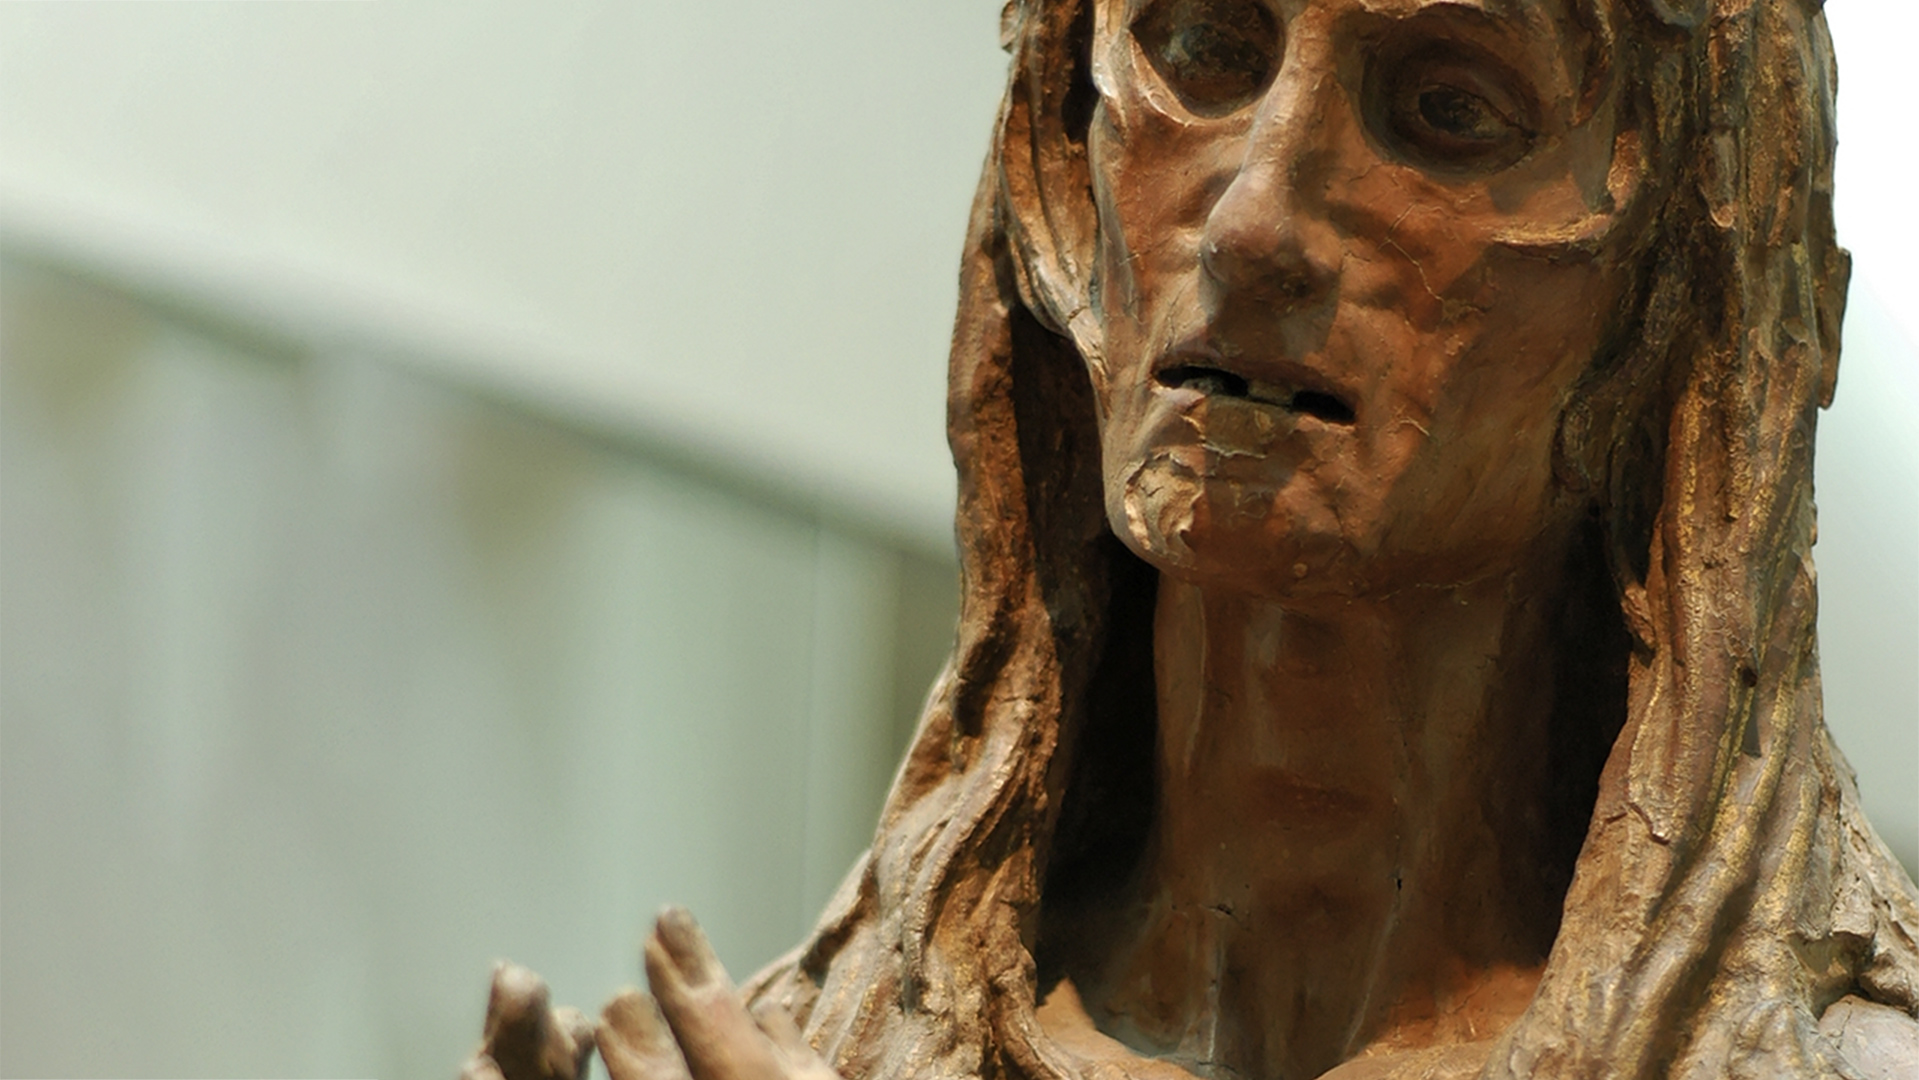 Statue of Mary Magdalene made from wood